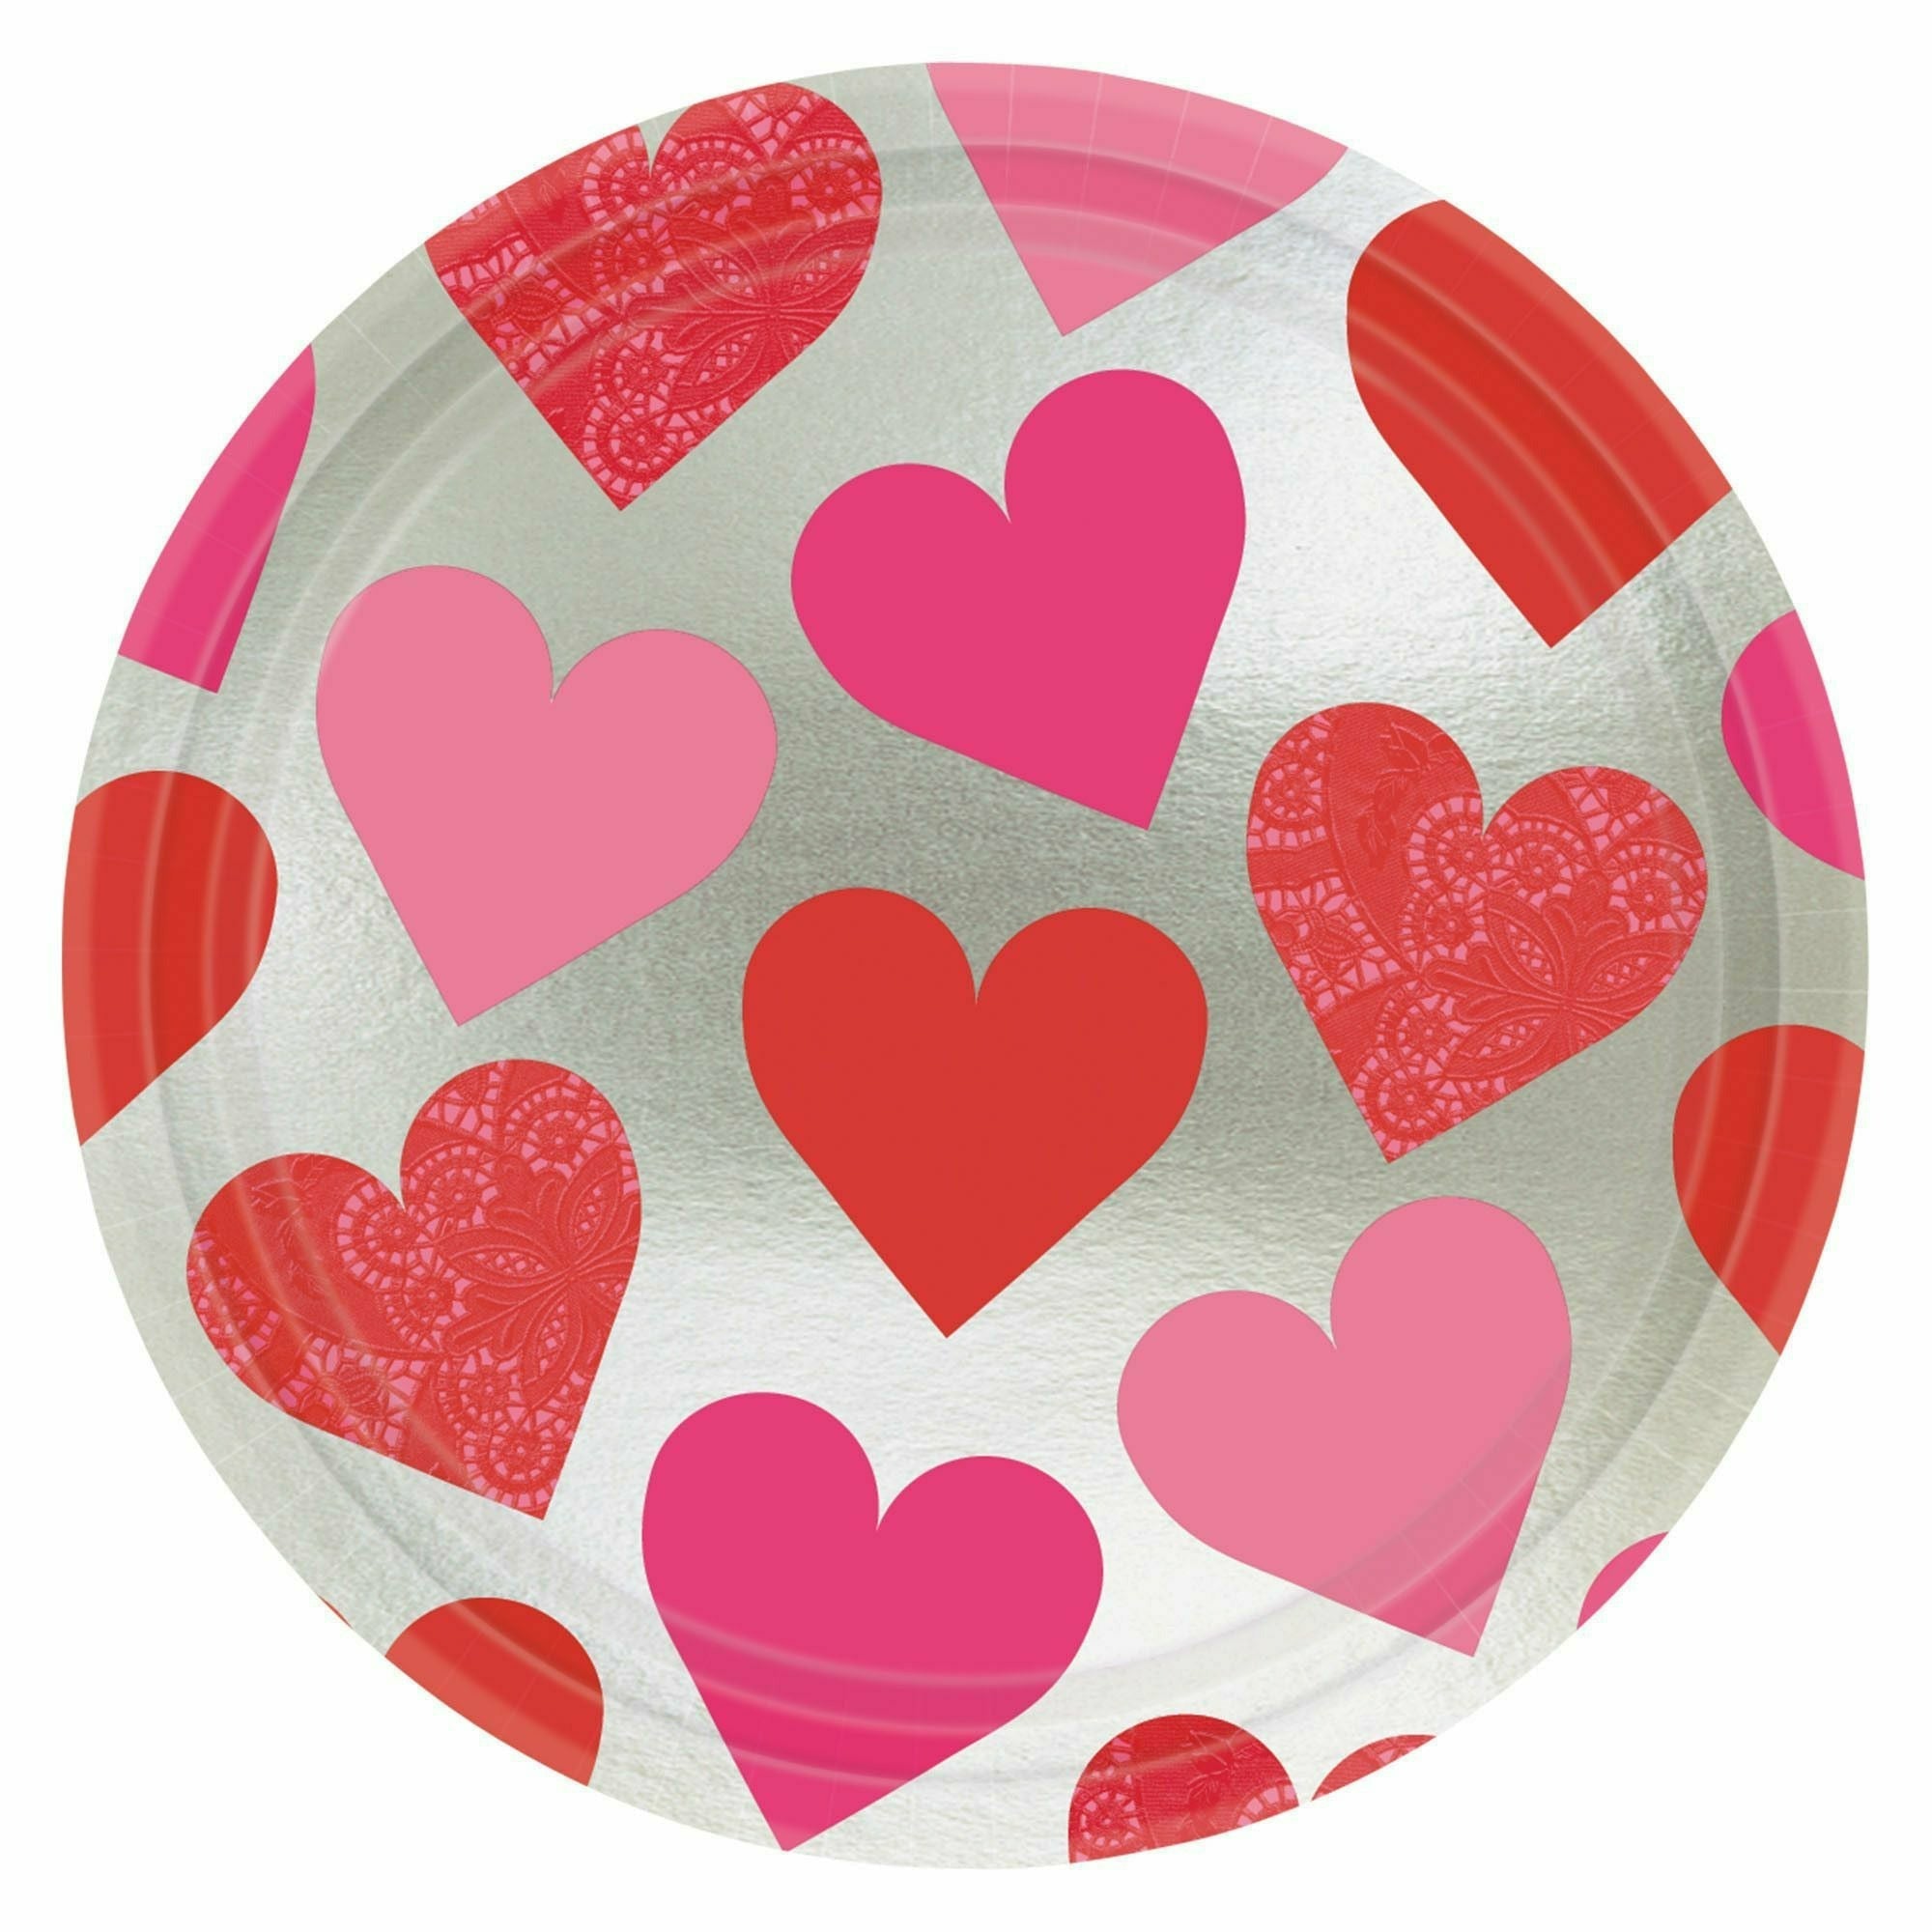 Amscan HOLIDAY: VALENTINES Key To Your Heart Metallic Plates, 9"